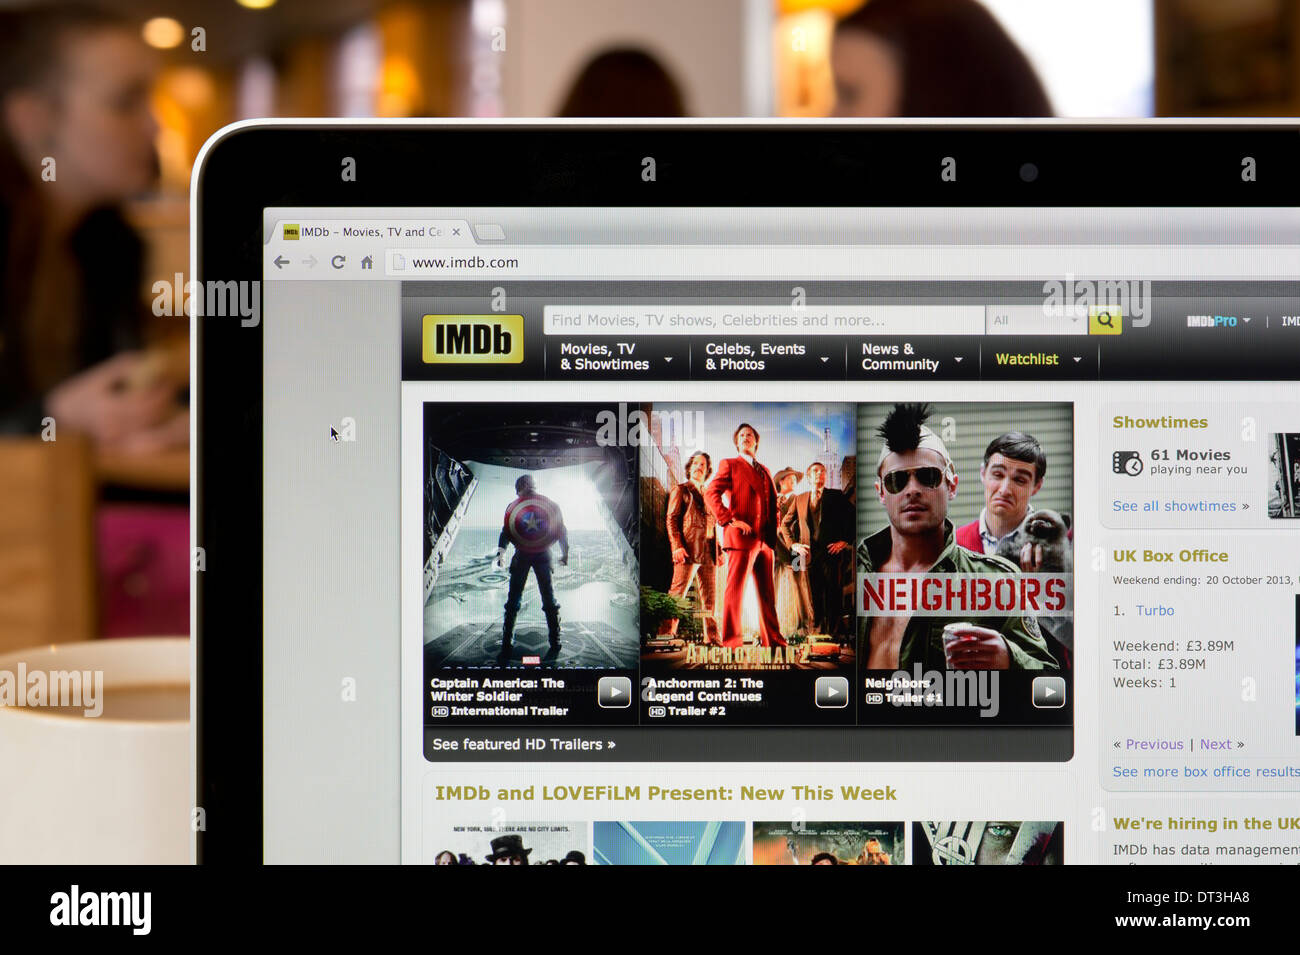 The IMDb website shot in a coffee shop environment (Editorial use only: print, TV, e-book and editorial website). Stock Photo